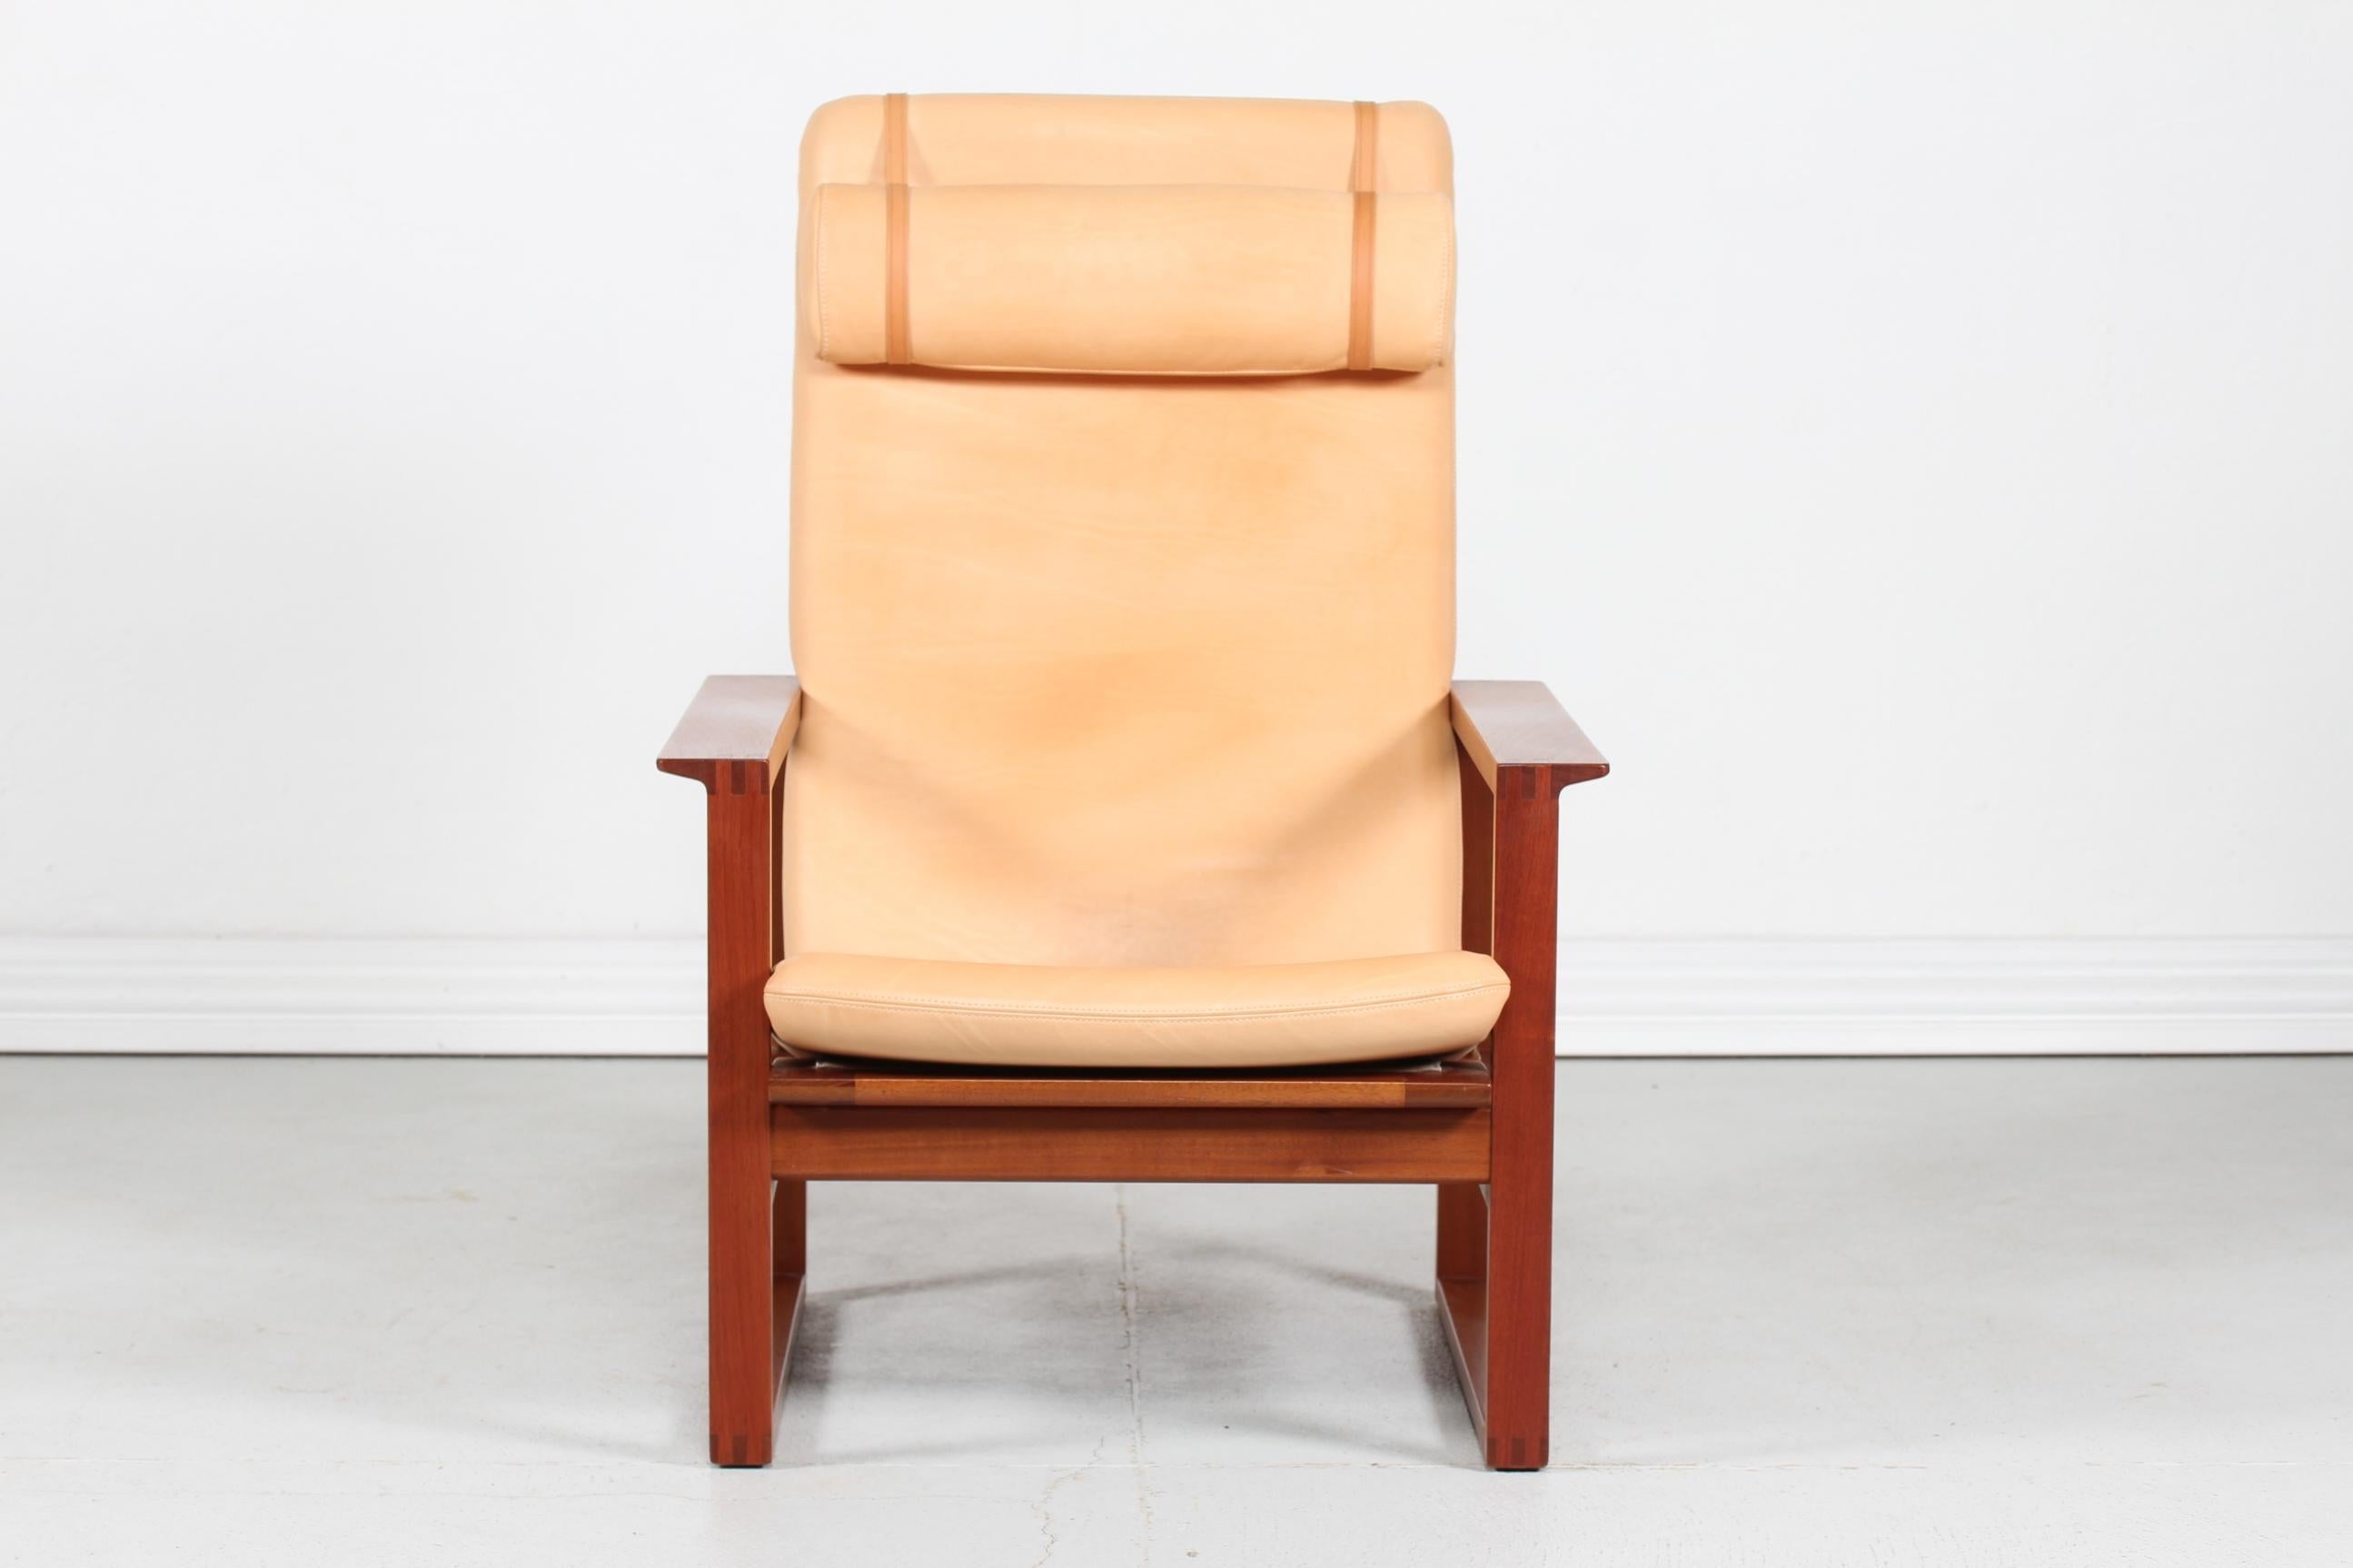 Danish vintage Børge Mogensen Sled chair - Slædestolen - model 2254.
It's upholstered with natural aniline leather and the frame is made of solid mahogany with lacquer. 
The cushions are filled inside with foam which gives a very good seating